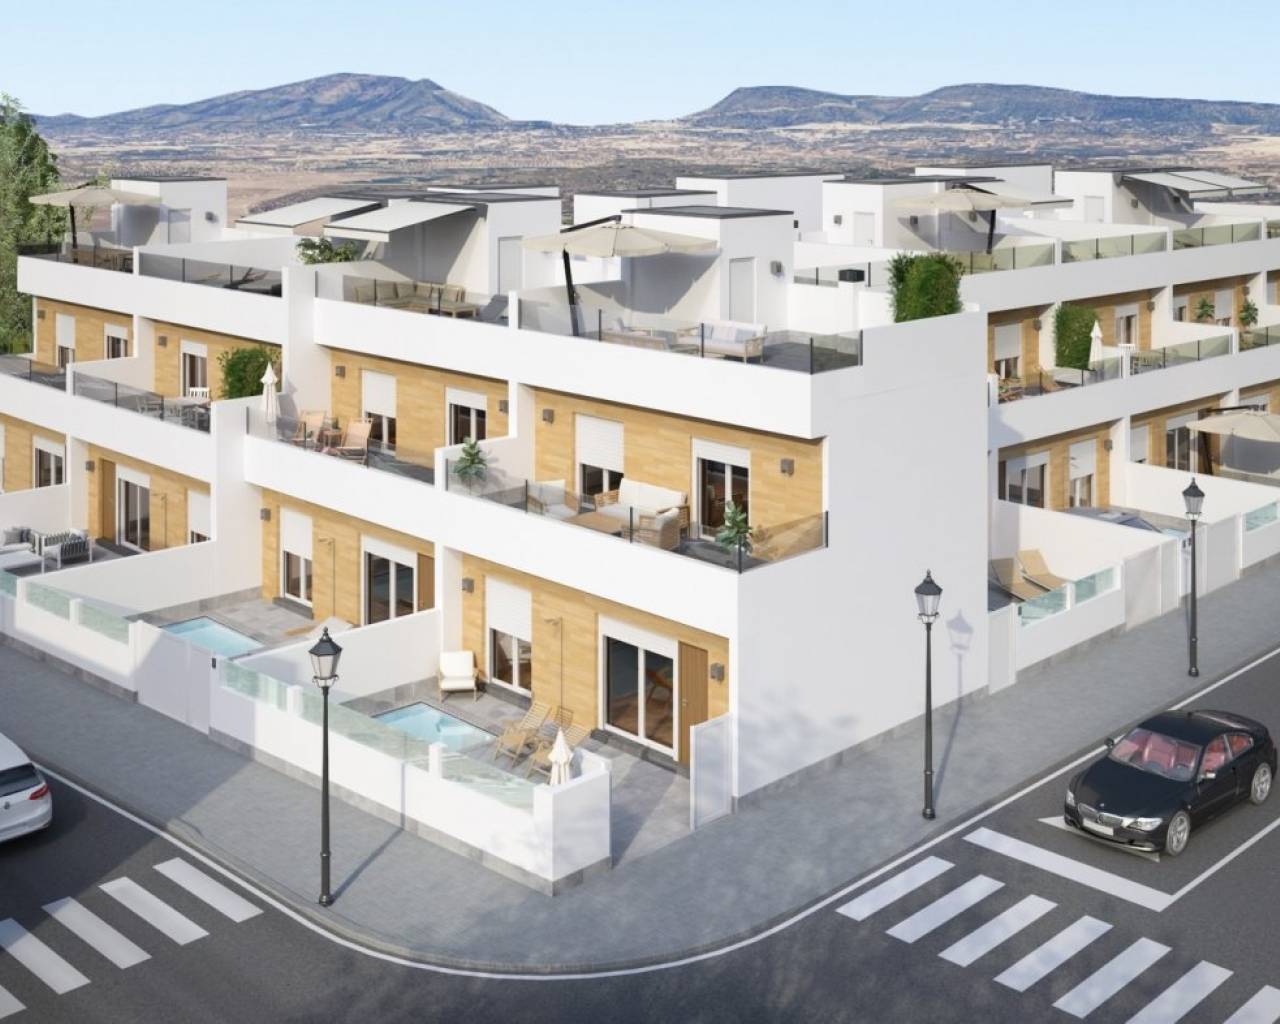 New Build - Bungalow  / Townhouse - Avileses